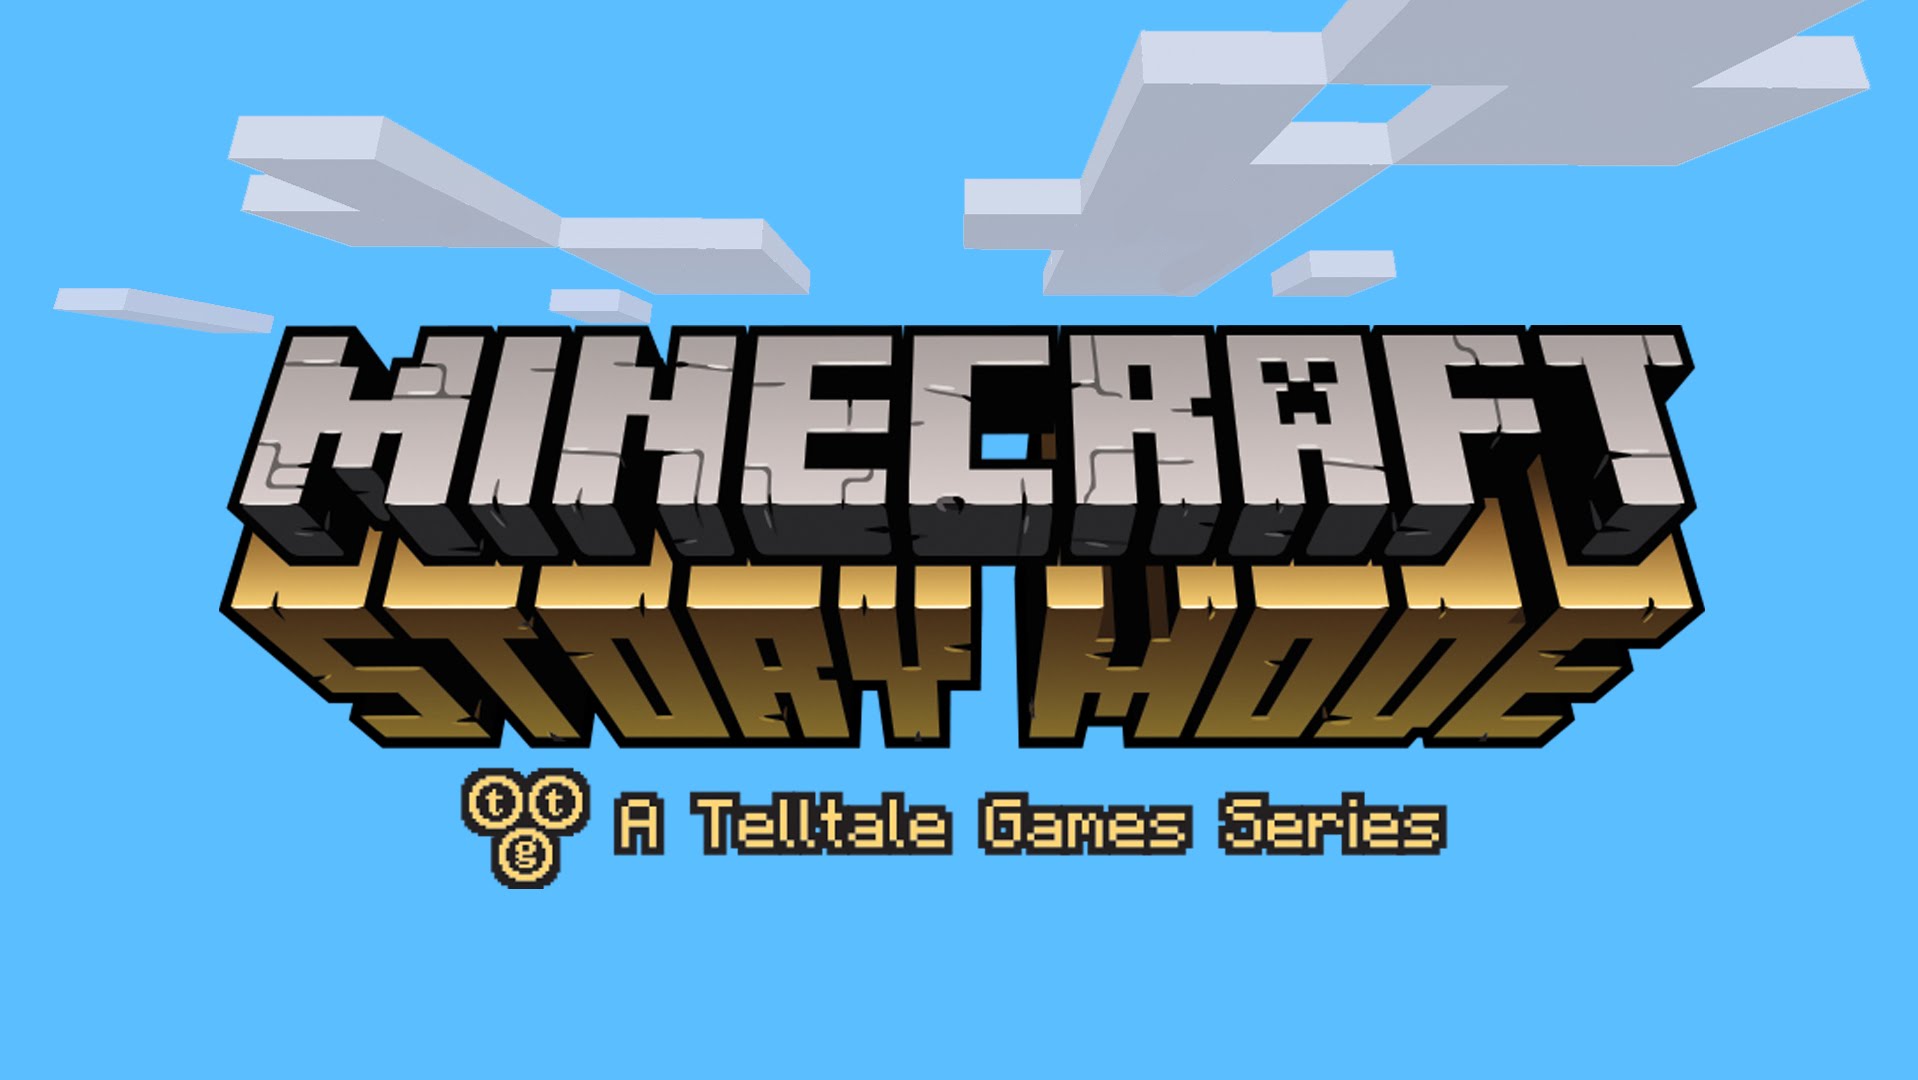 Telltale Games releases trailer for “Minecraft: Story Mode” - 